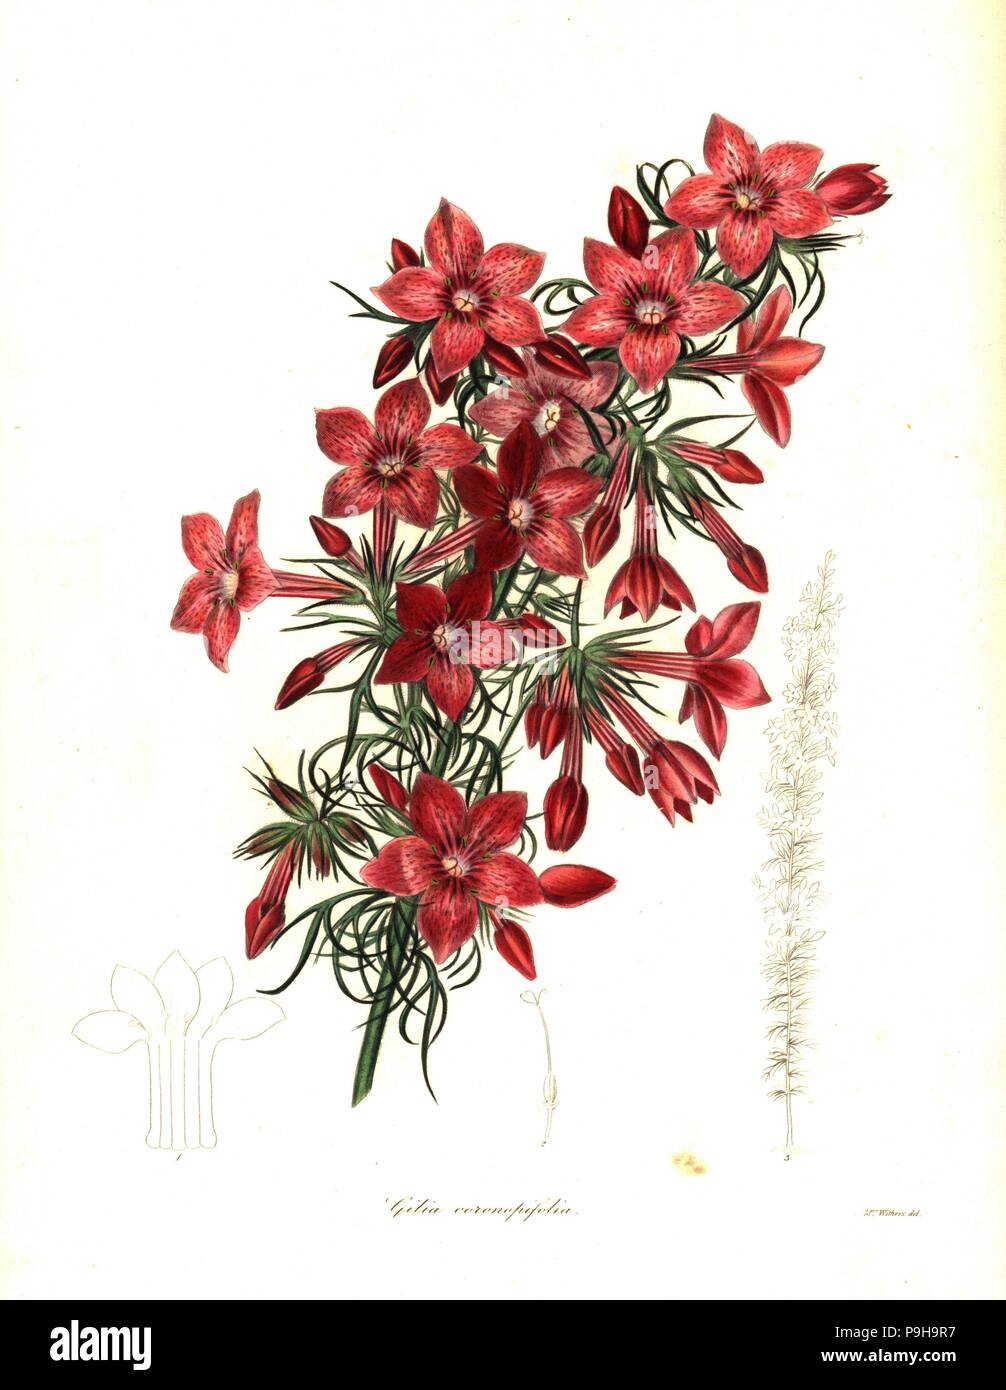 Raven-footed gilia, Gilia coronopifolia. Handcoloured copperplate engraving after a botanical illustration by Mrs Augusta Withers from Benjamin Maund and the Rev. John Stevens Henslow's The Botanist, London, 1836. Stock Photo